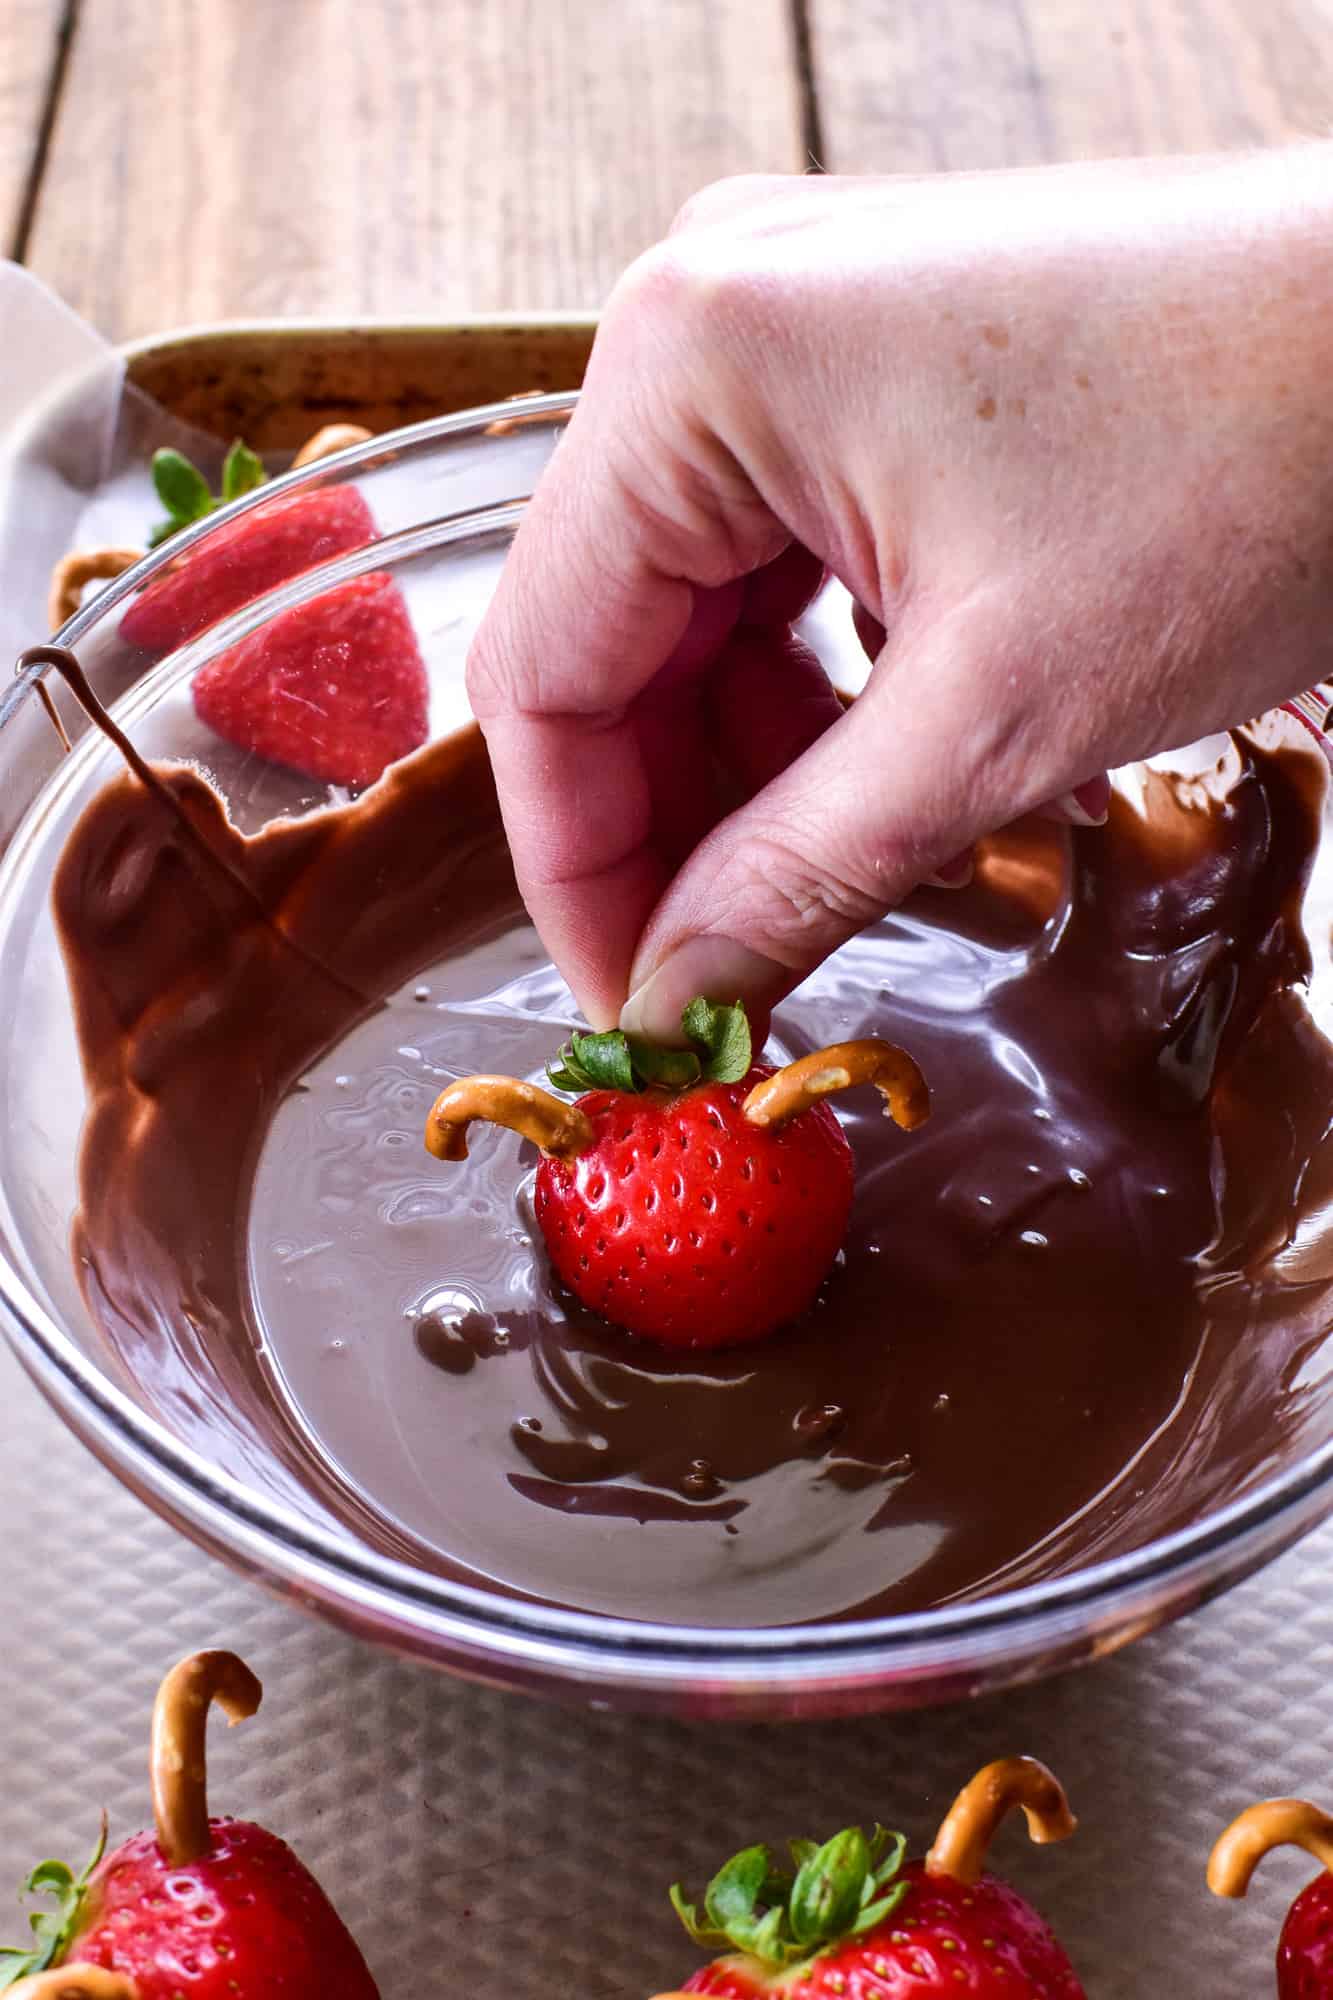 Dip shot of strawberry reindeer into melted chocoalte